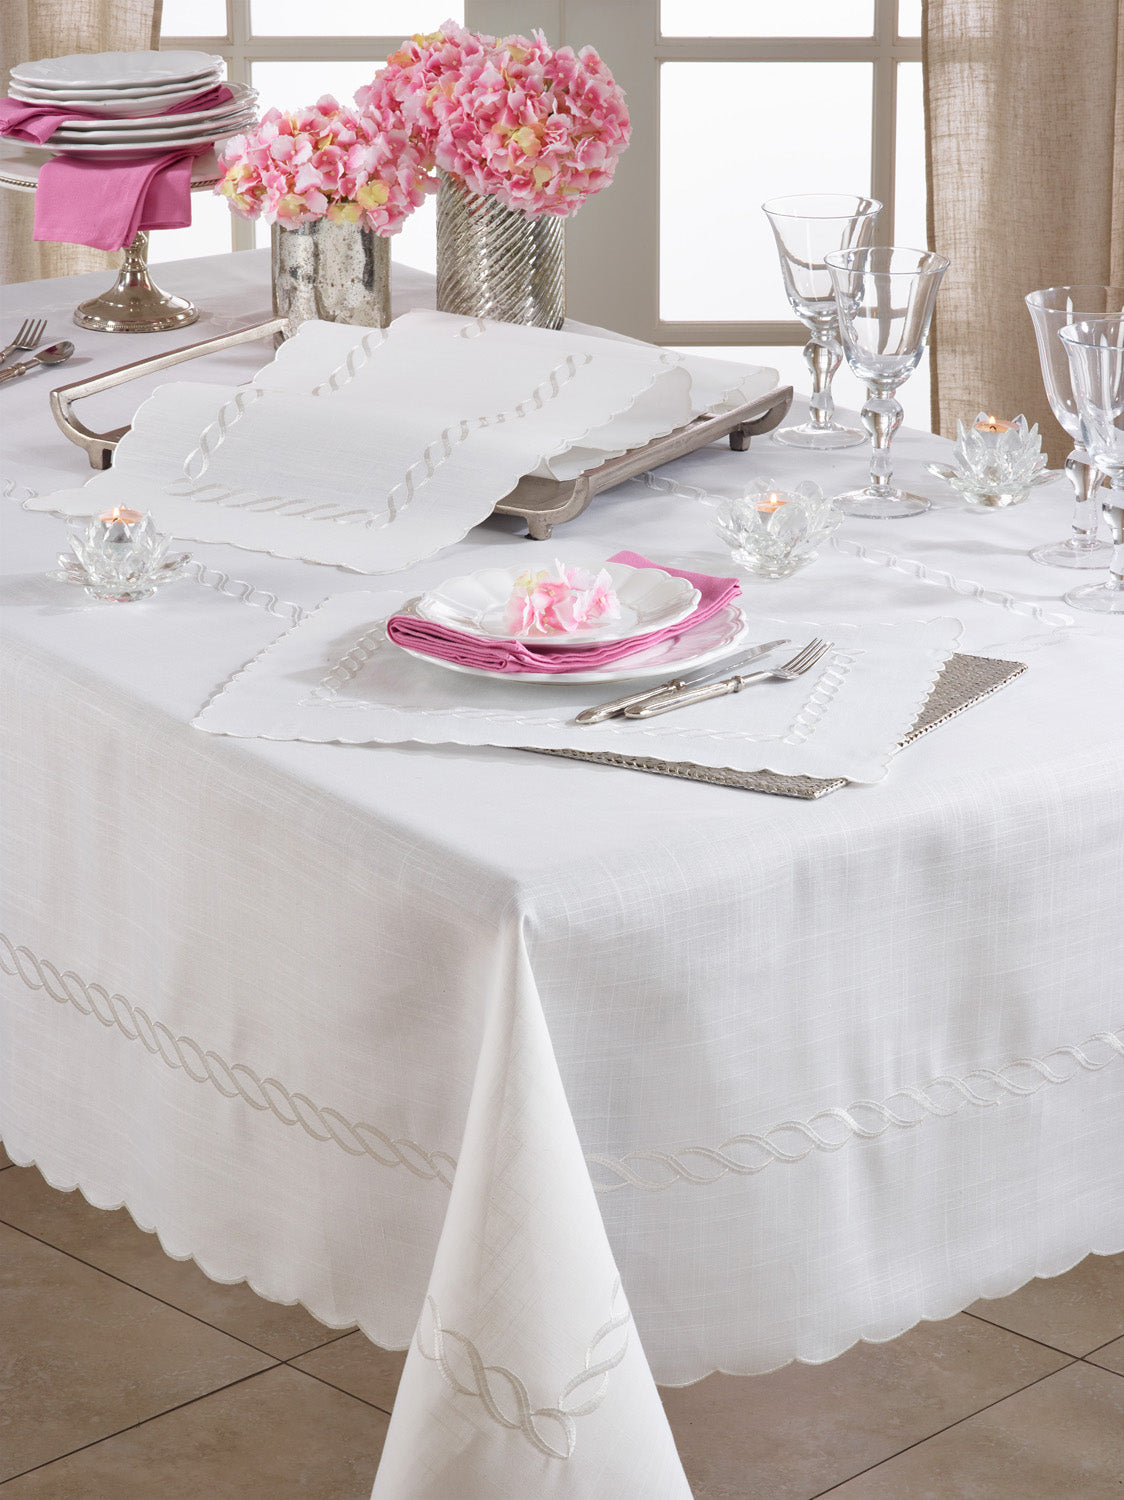 Braided Embroidery Tablecloth - 67"x120" - Oblong